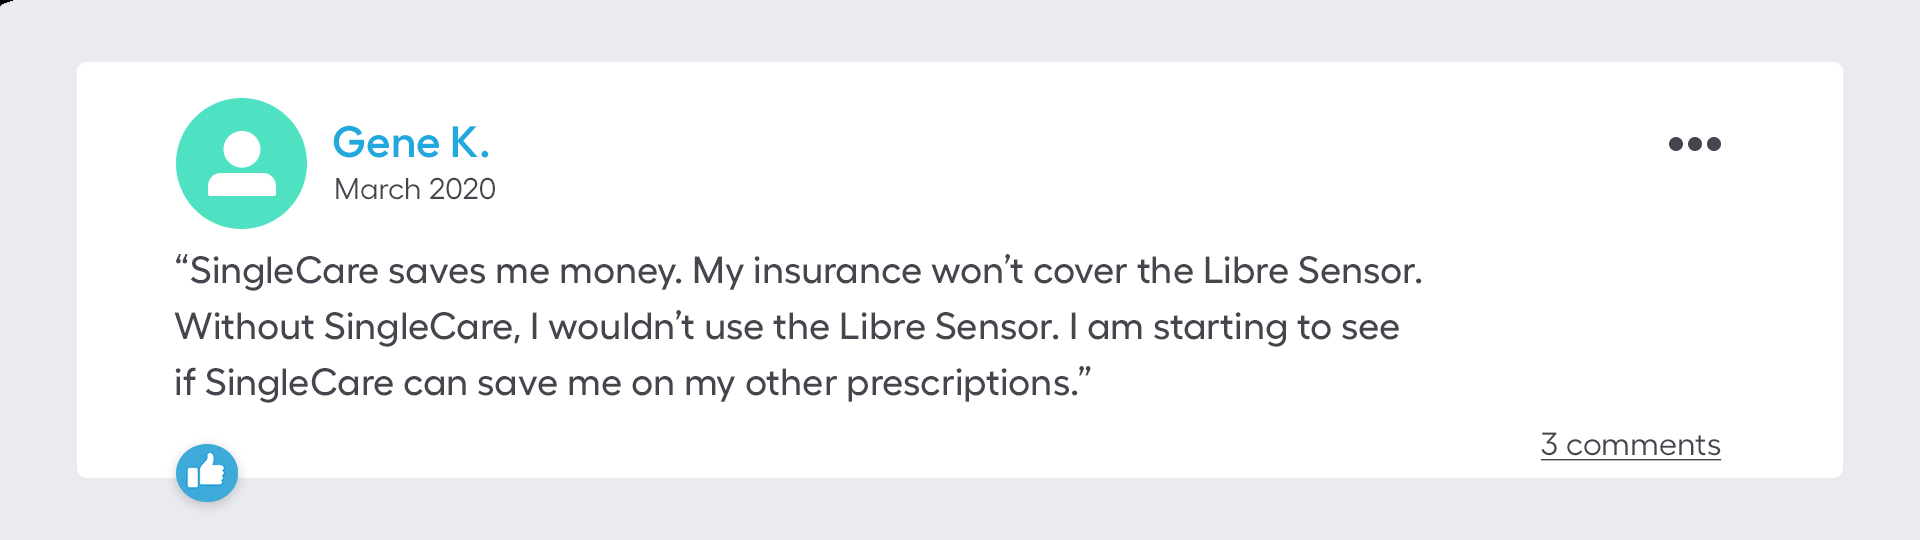 SingleCare saves me money. My insurance won’t cover the Libre Sensor. Without SingleCare, I wouldn’t use the Libre Sensor. I am starting to see if SingleCare can save me on my other prescriptions.